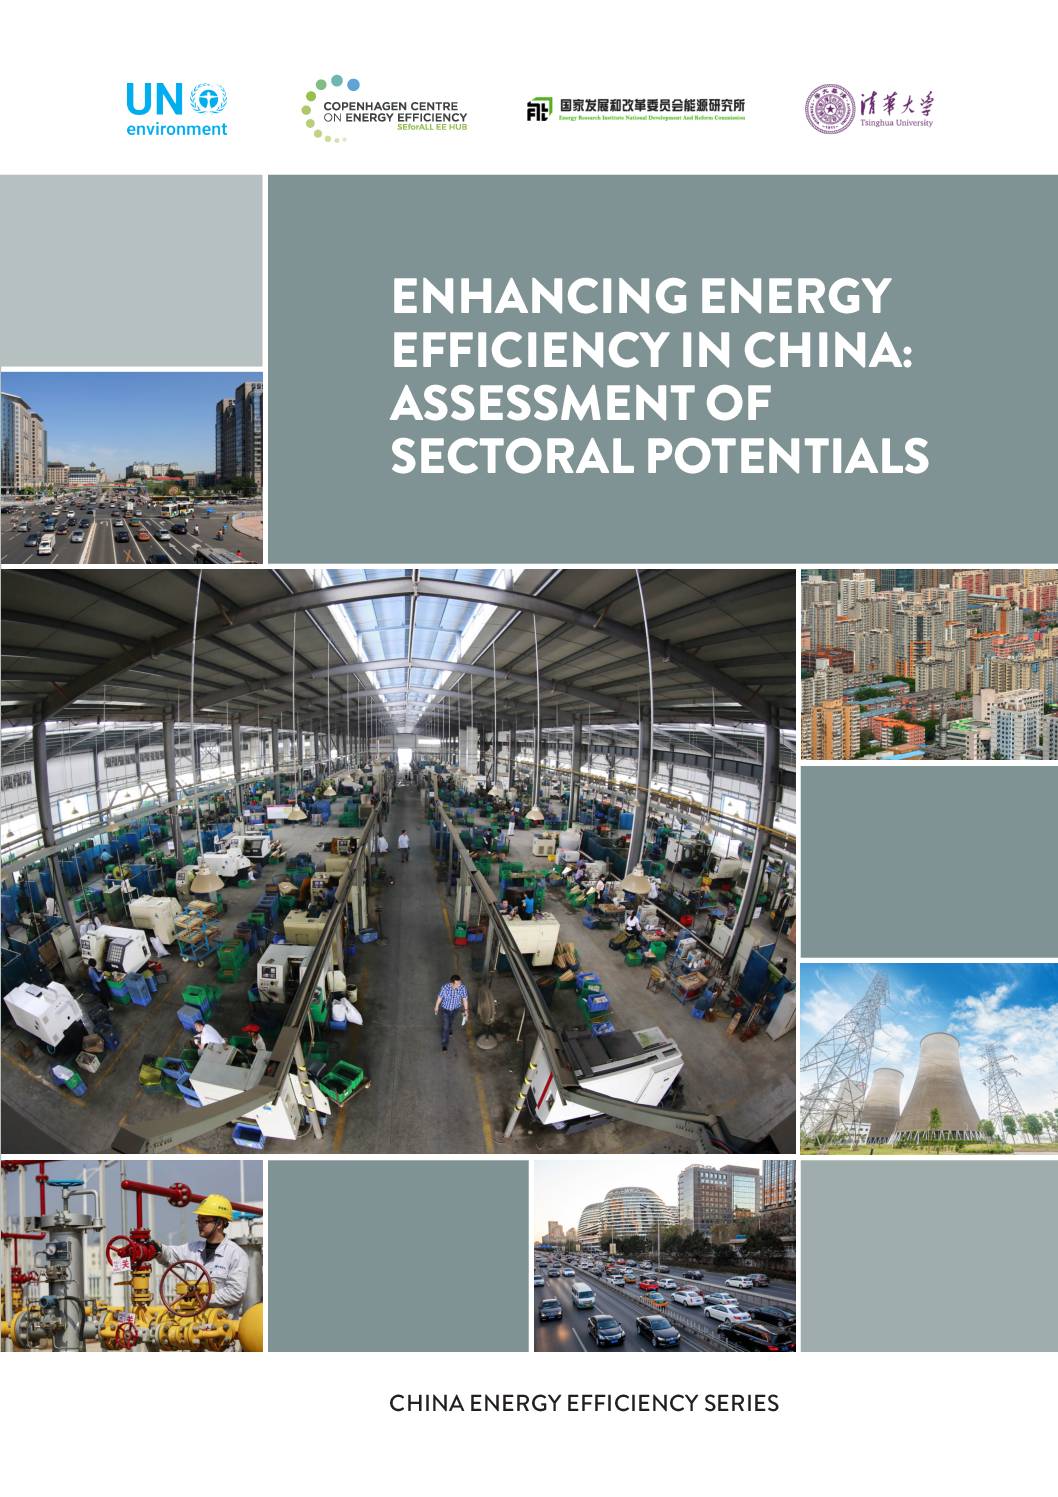 Enhancing Energy Efficiency in China: Assessment of Sectoral Potentials